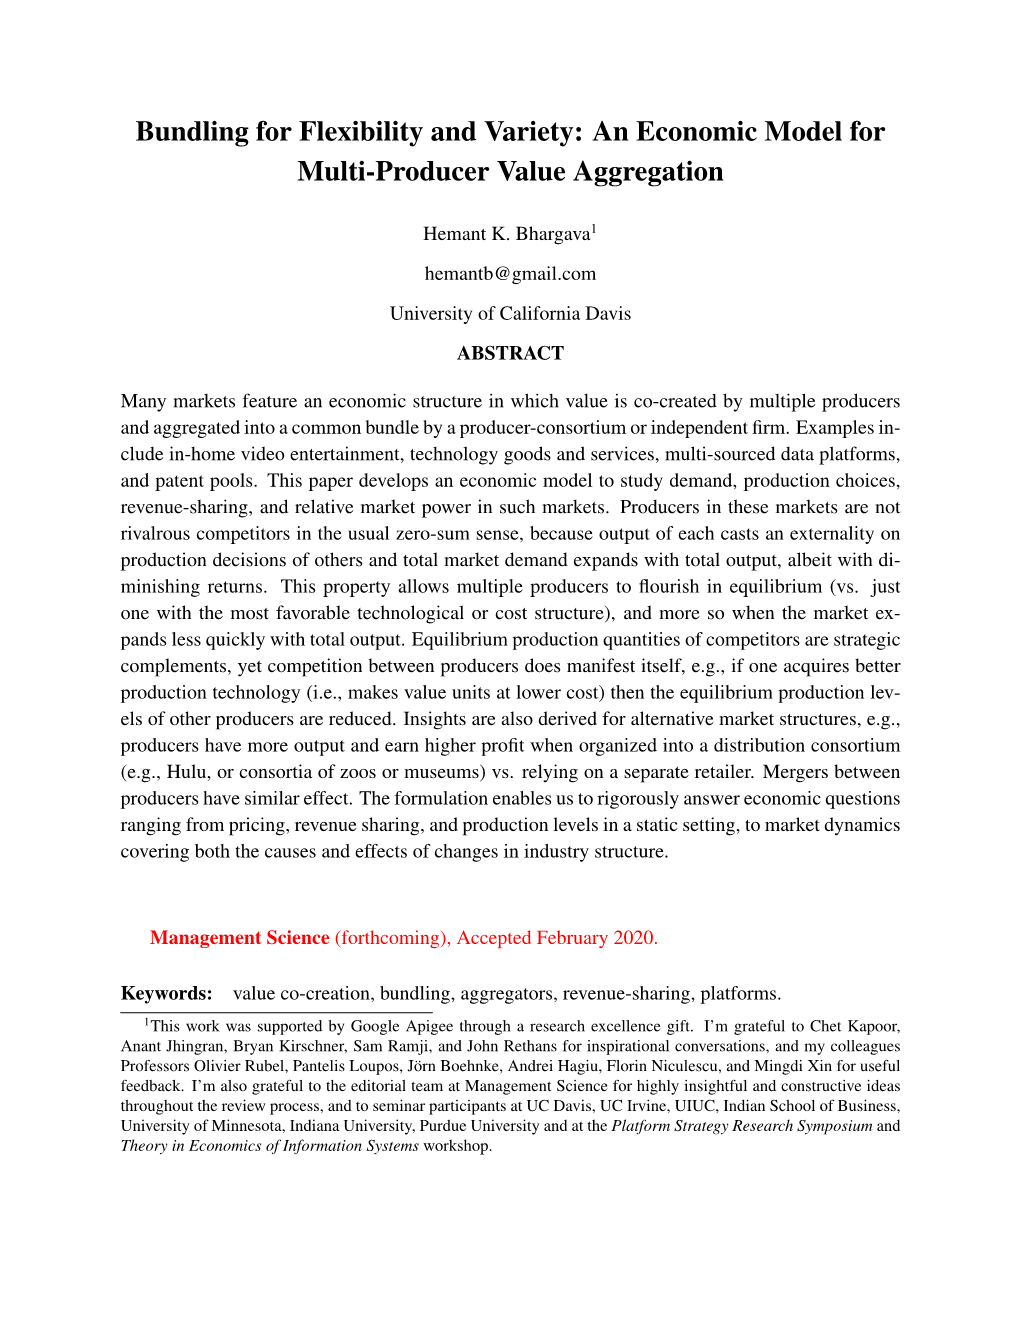 Bundling for Flexibility and Variety: an Economic Model for Multi-Producer Value Aggregation